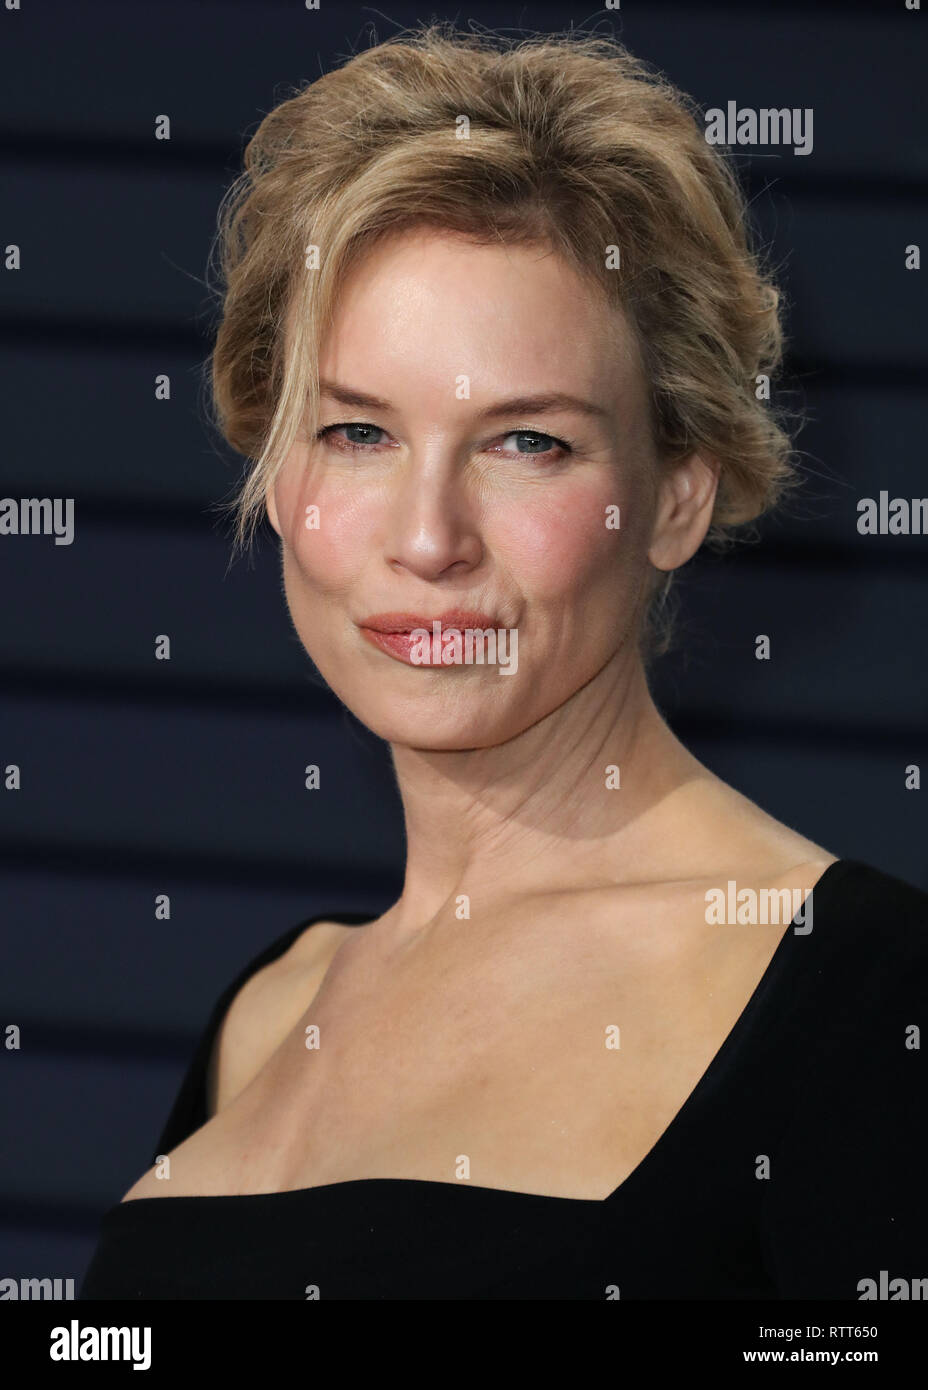 BEVERLY HILLS, LOS ANGELES, CA, USA - FEBRUARY 24: Actress Renee Zellweger wearing an A.W.A.K.E dress, Jimmy Choo shoes, David Webb jewelry, and a William and Son clutch arrives at the 2019 Vanity Fair Oscar Party held at the Wallis Annenberg Center for the Performing Arts on February 24, 2019 in Beverly Hills, Los Angeles, California, United States. (Photo by Xavier Collin/Image Press Agency) Stock Photo